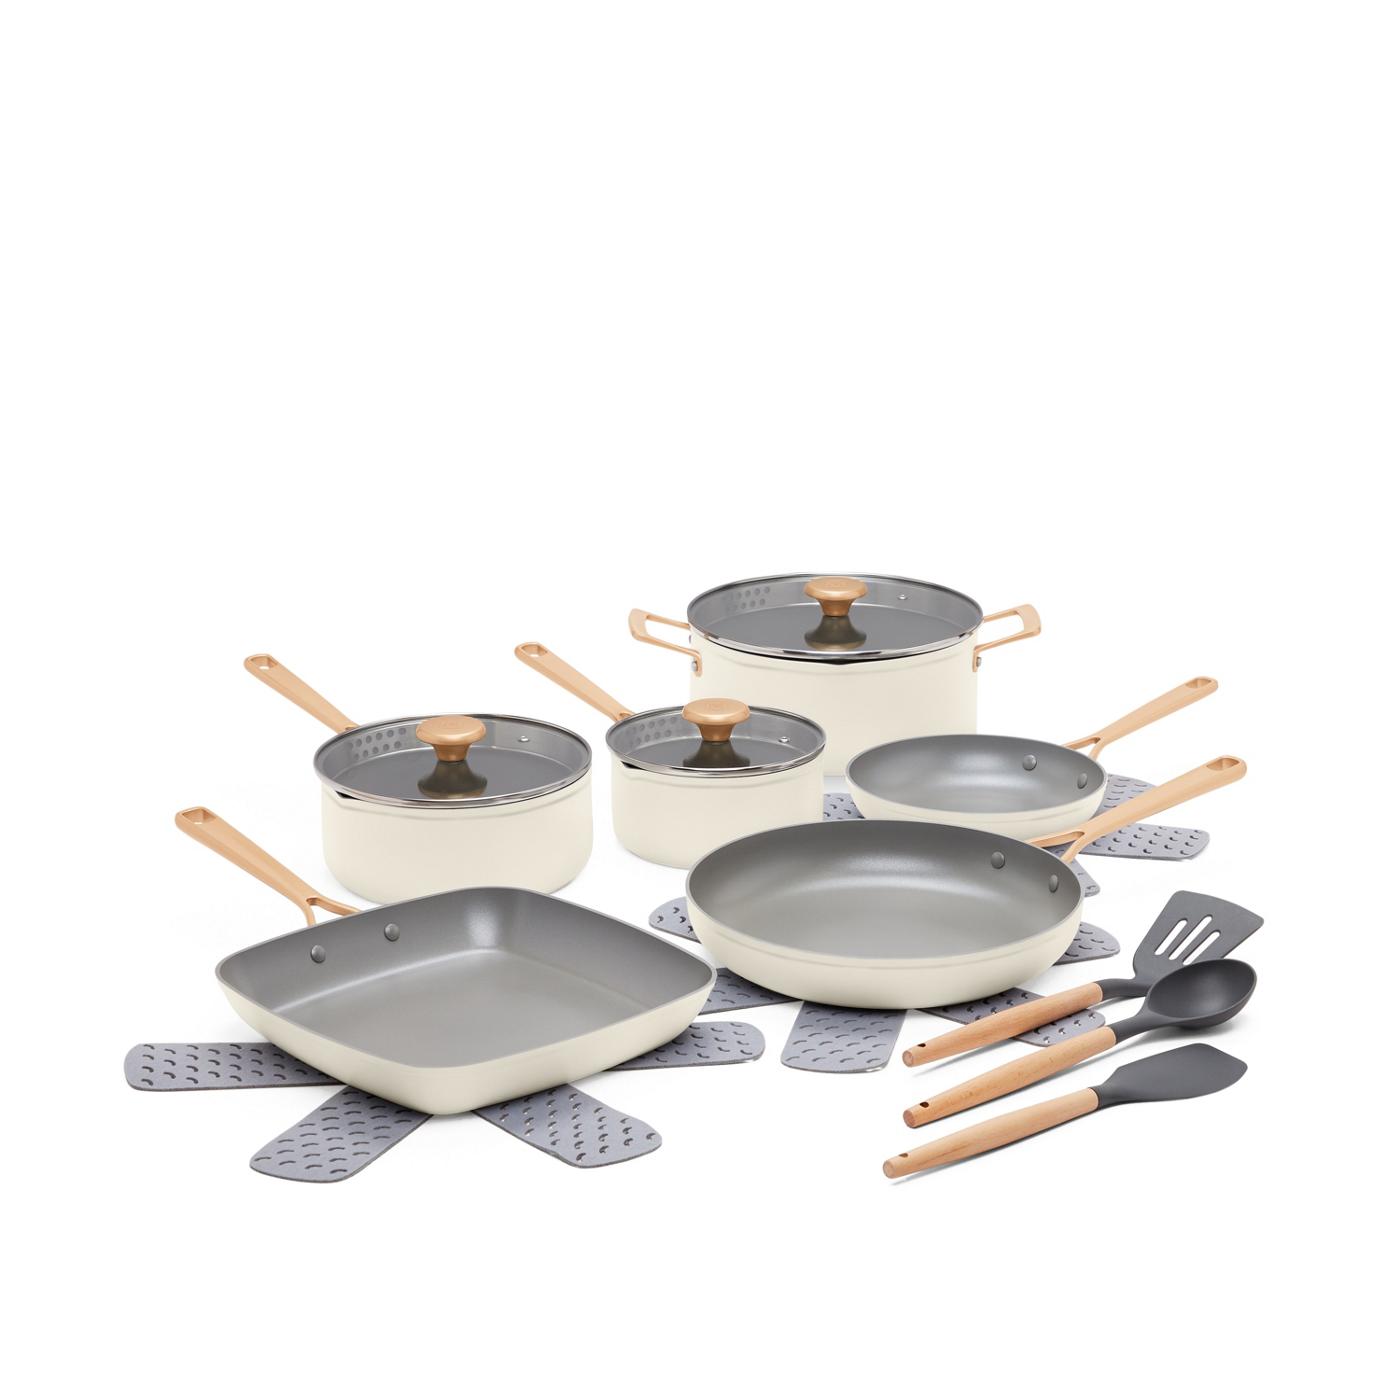 Pots and Pans Set Nonstick White Granite Induction Kitchen